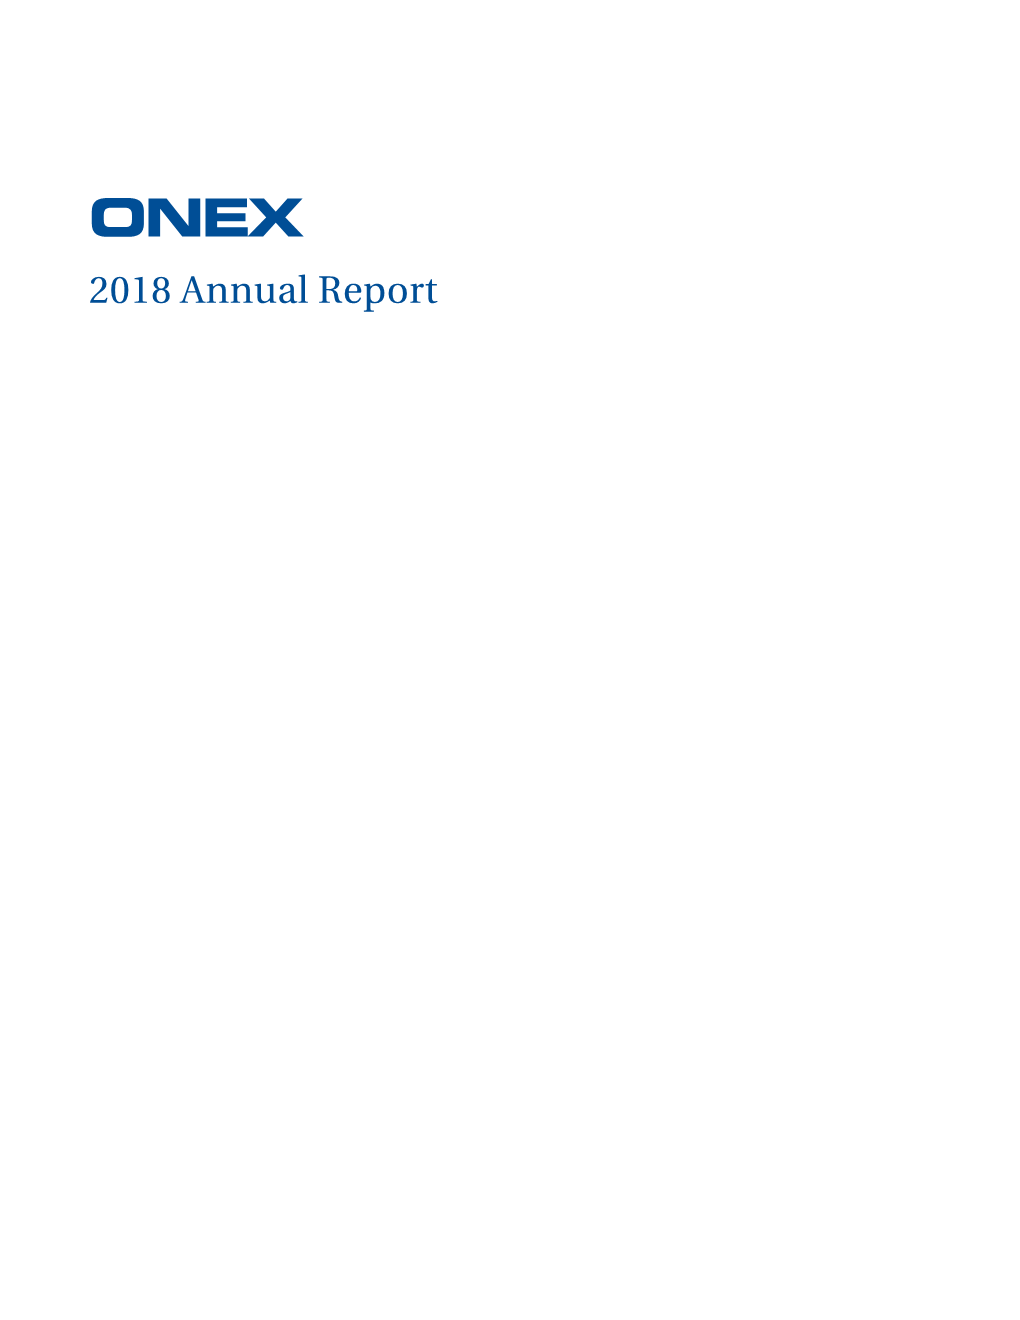 2018 Annual Report ONEX and ITS OPERATING BUSINESSES